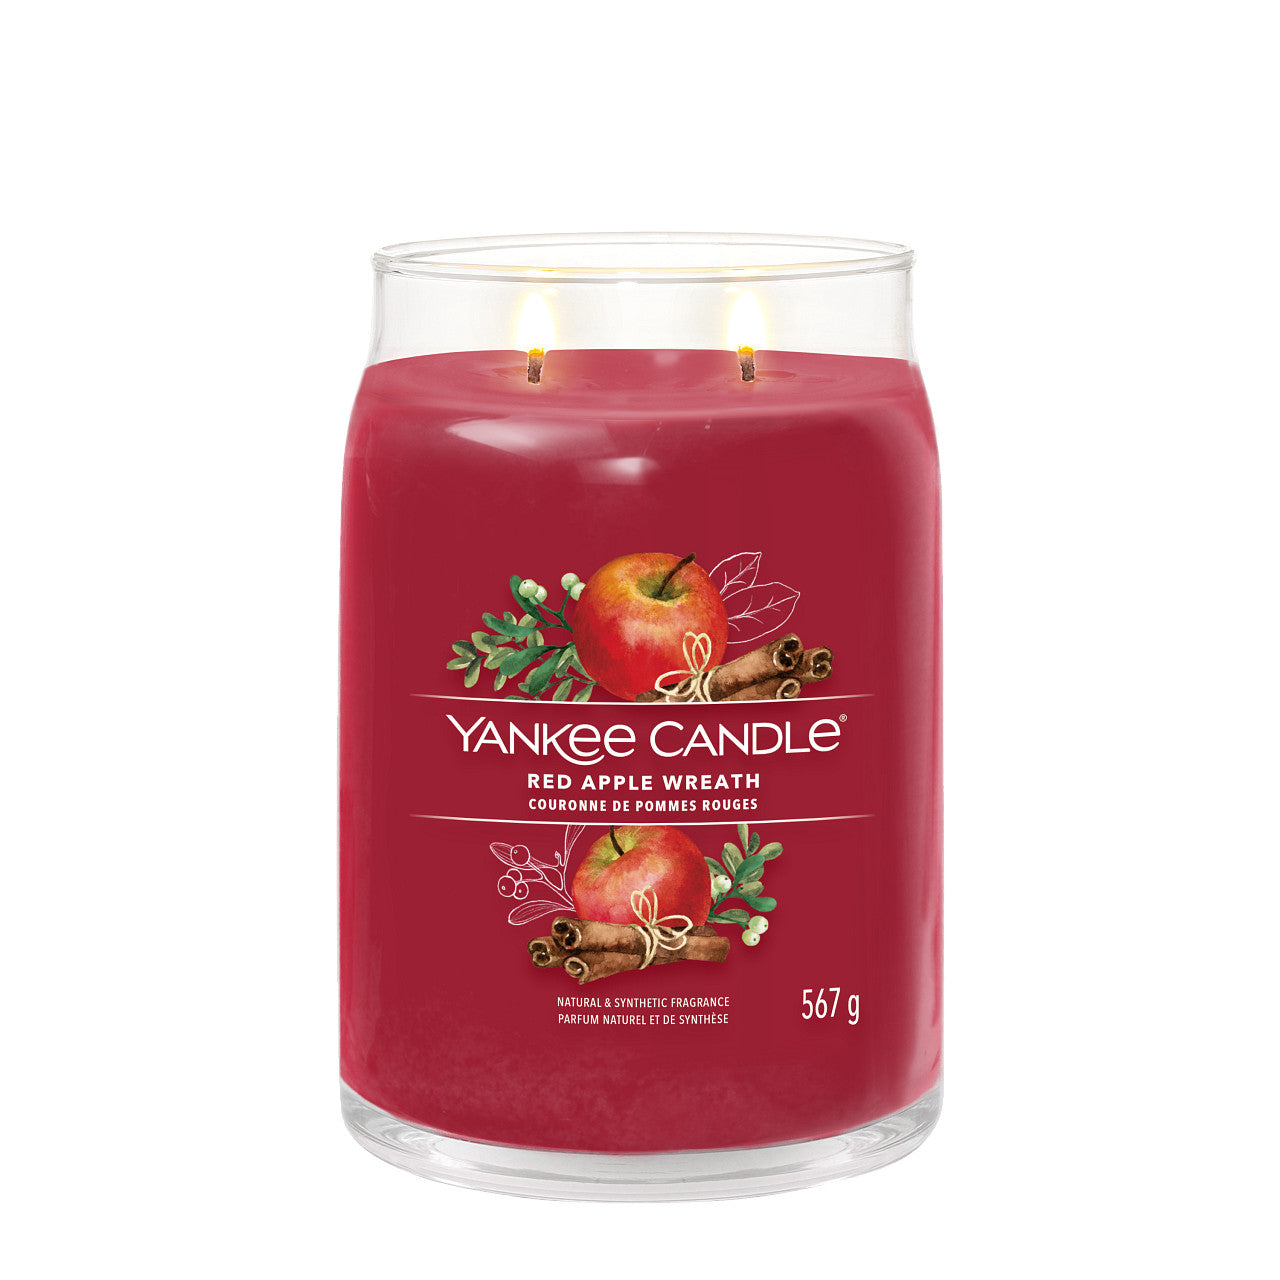 Red Apple Wreath - Signature Large Jar Scented Candle